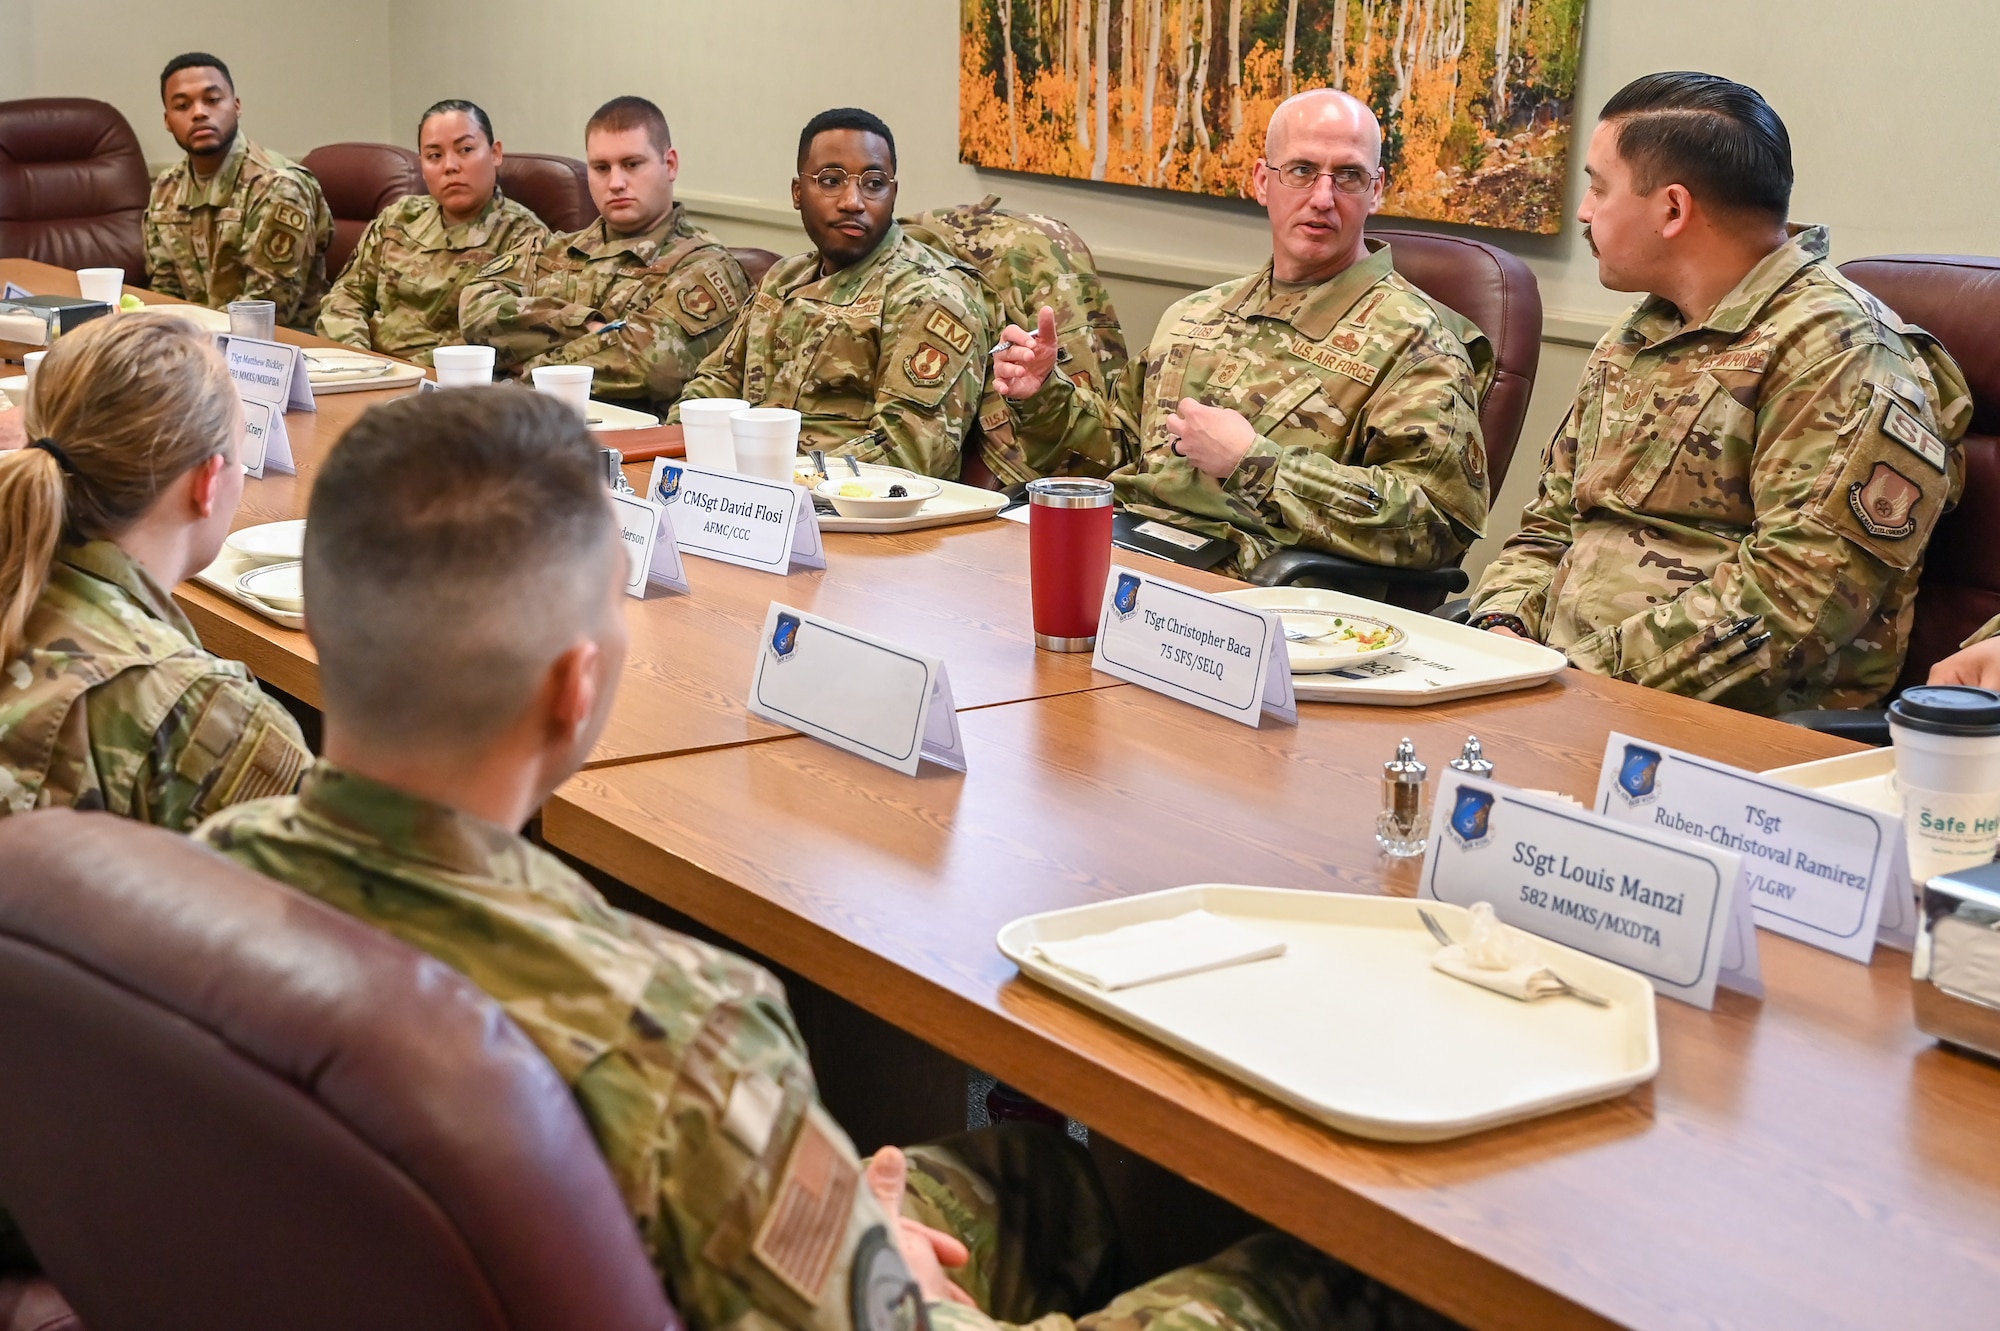 Chief Master Sgt. David A. Flosi, Air Force Materiel Command command chief, meets with Airmen and Guardians during a base visit April 13, 2023, at Hill Air Force Base, Utah.